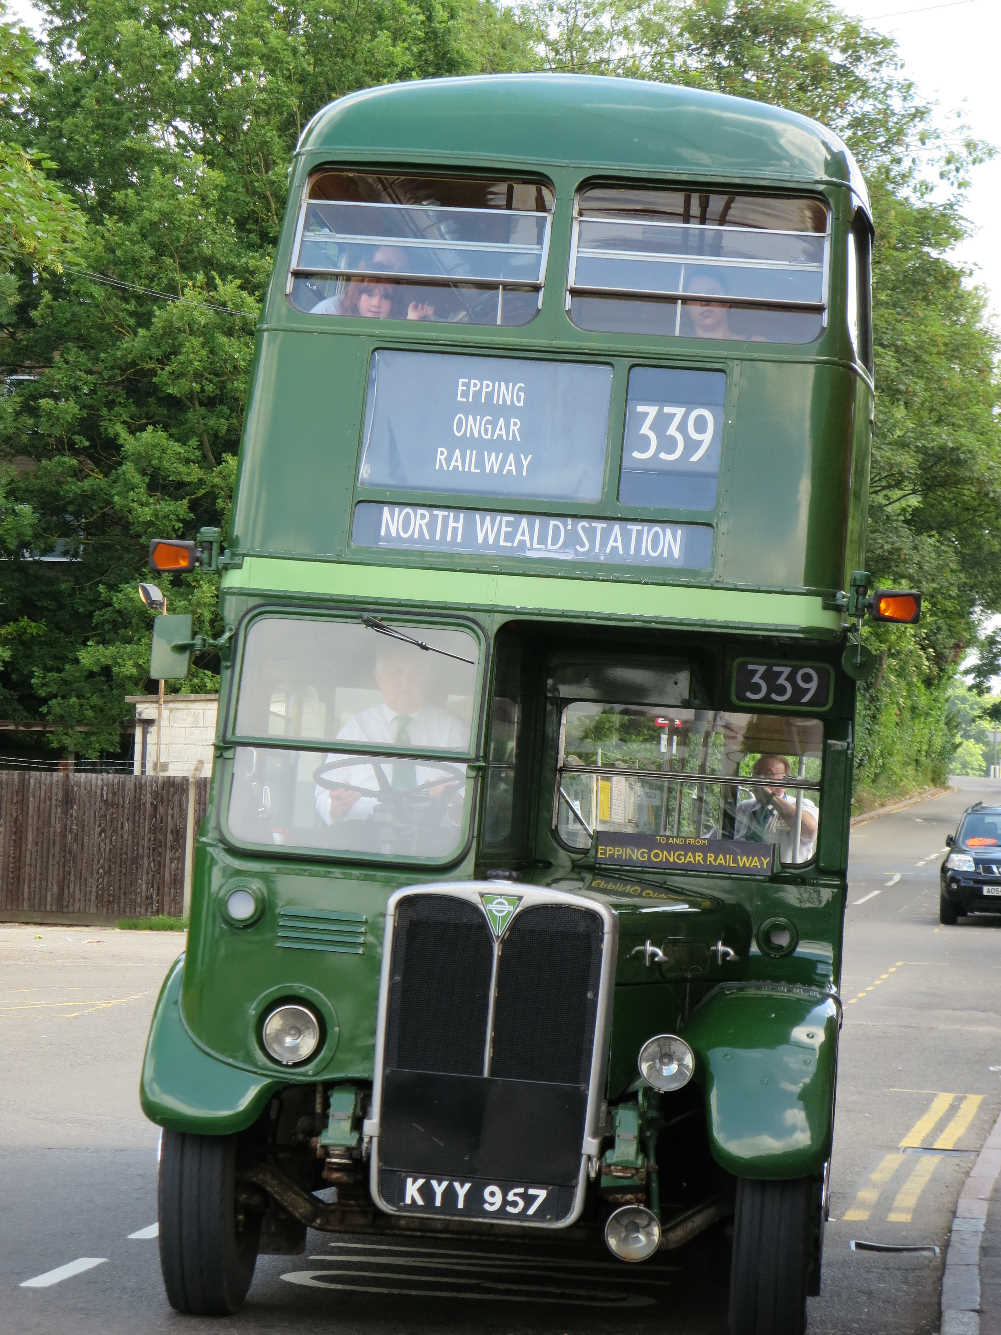 RT bus route 339, Epping Ongar Railway